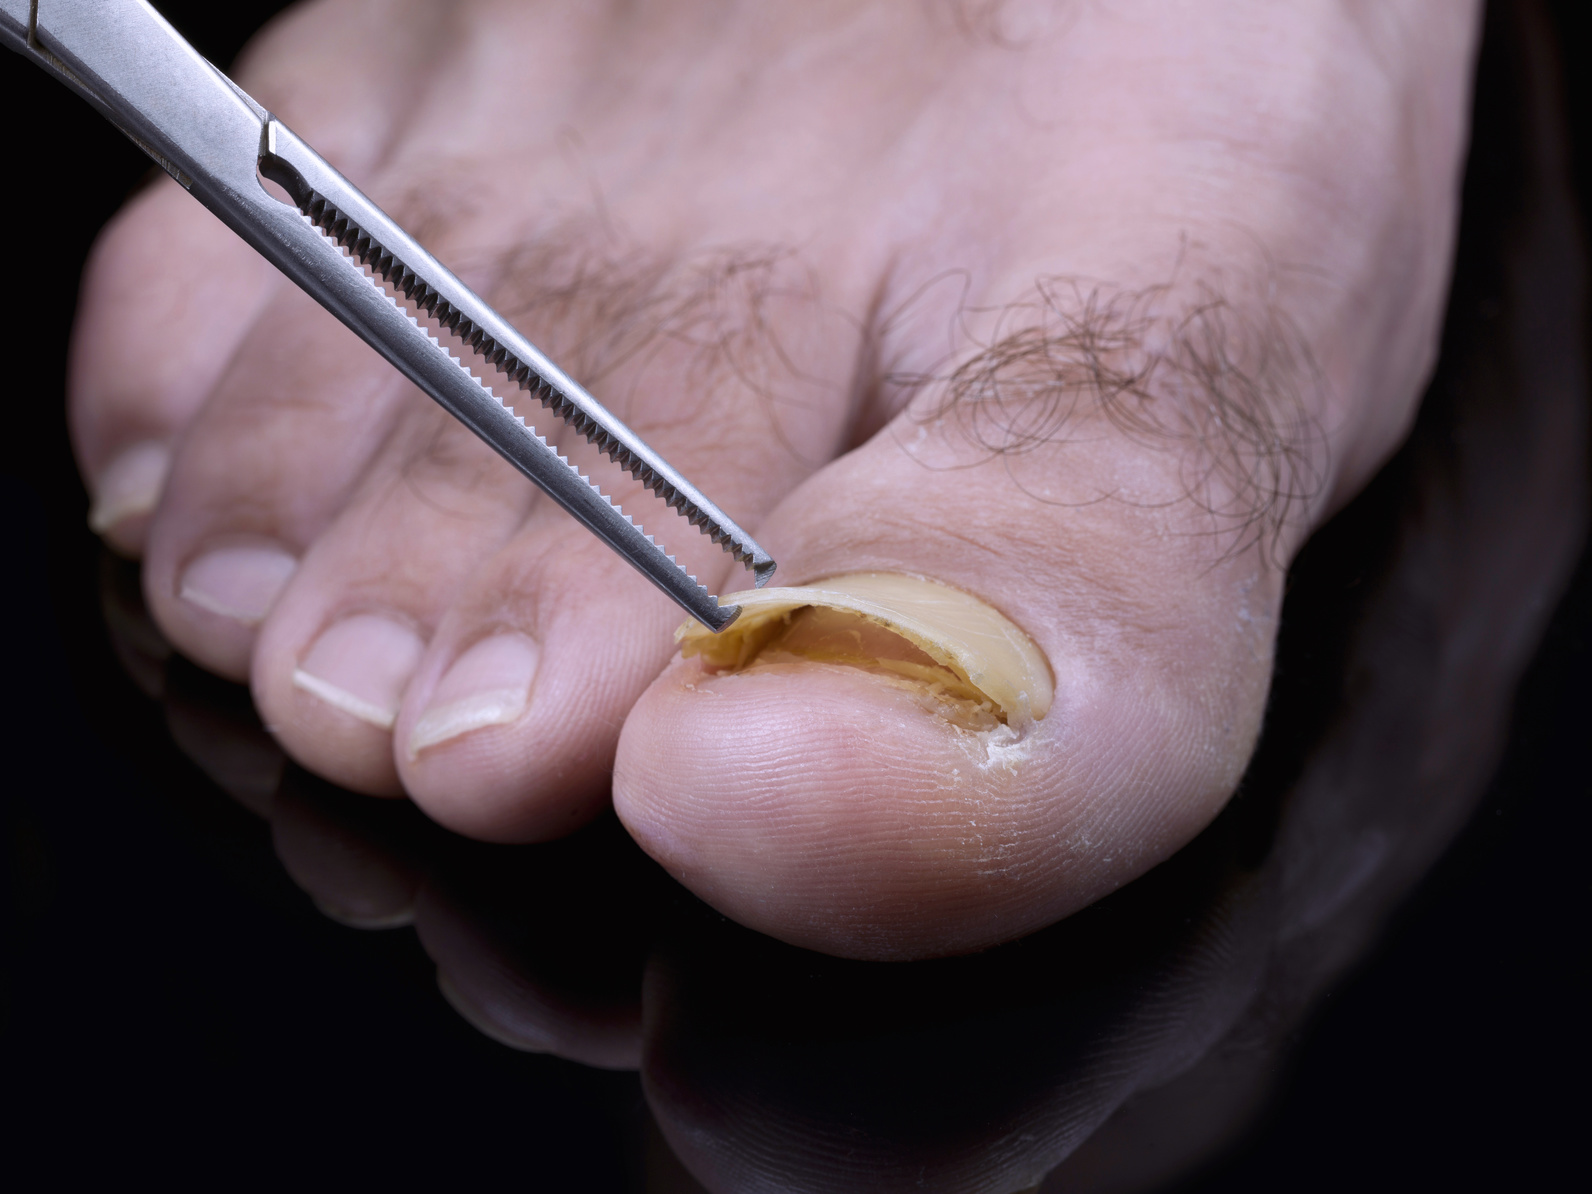 A photograph of a foot with a fungal infection of the toenails